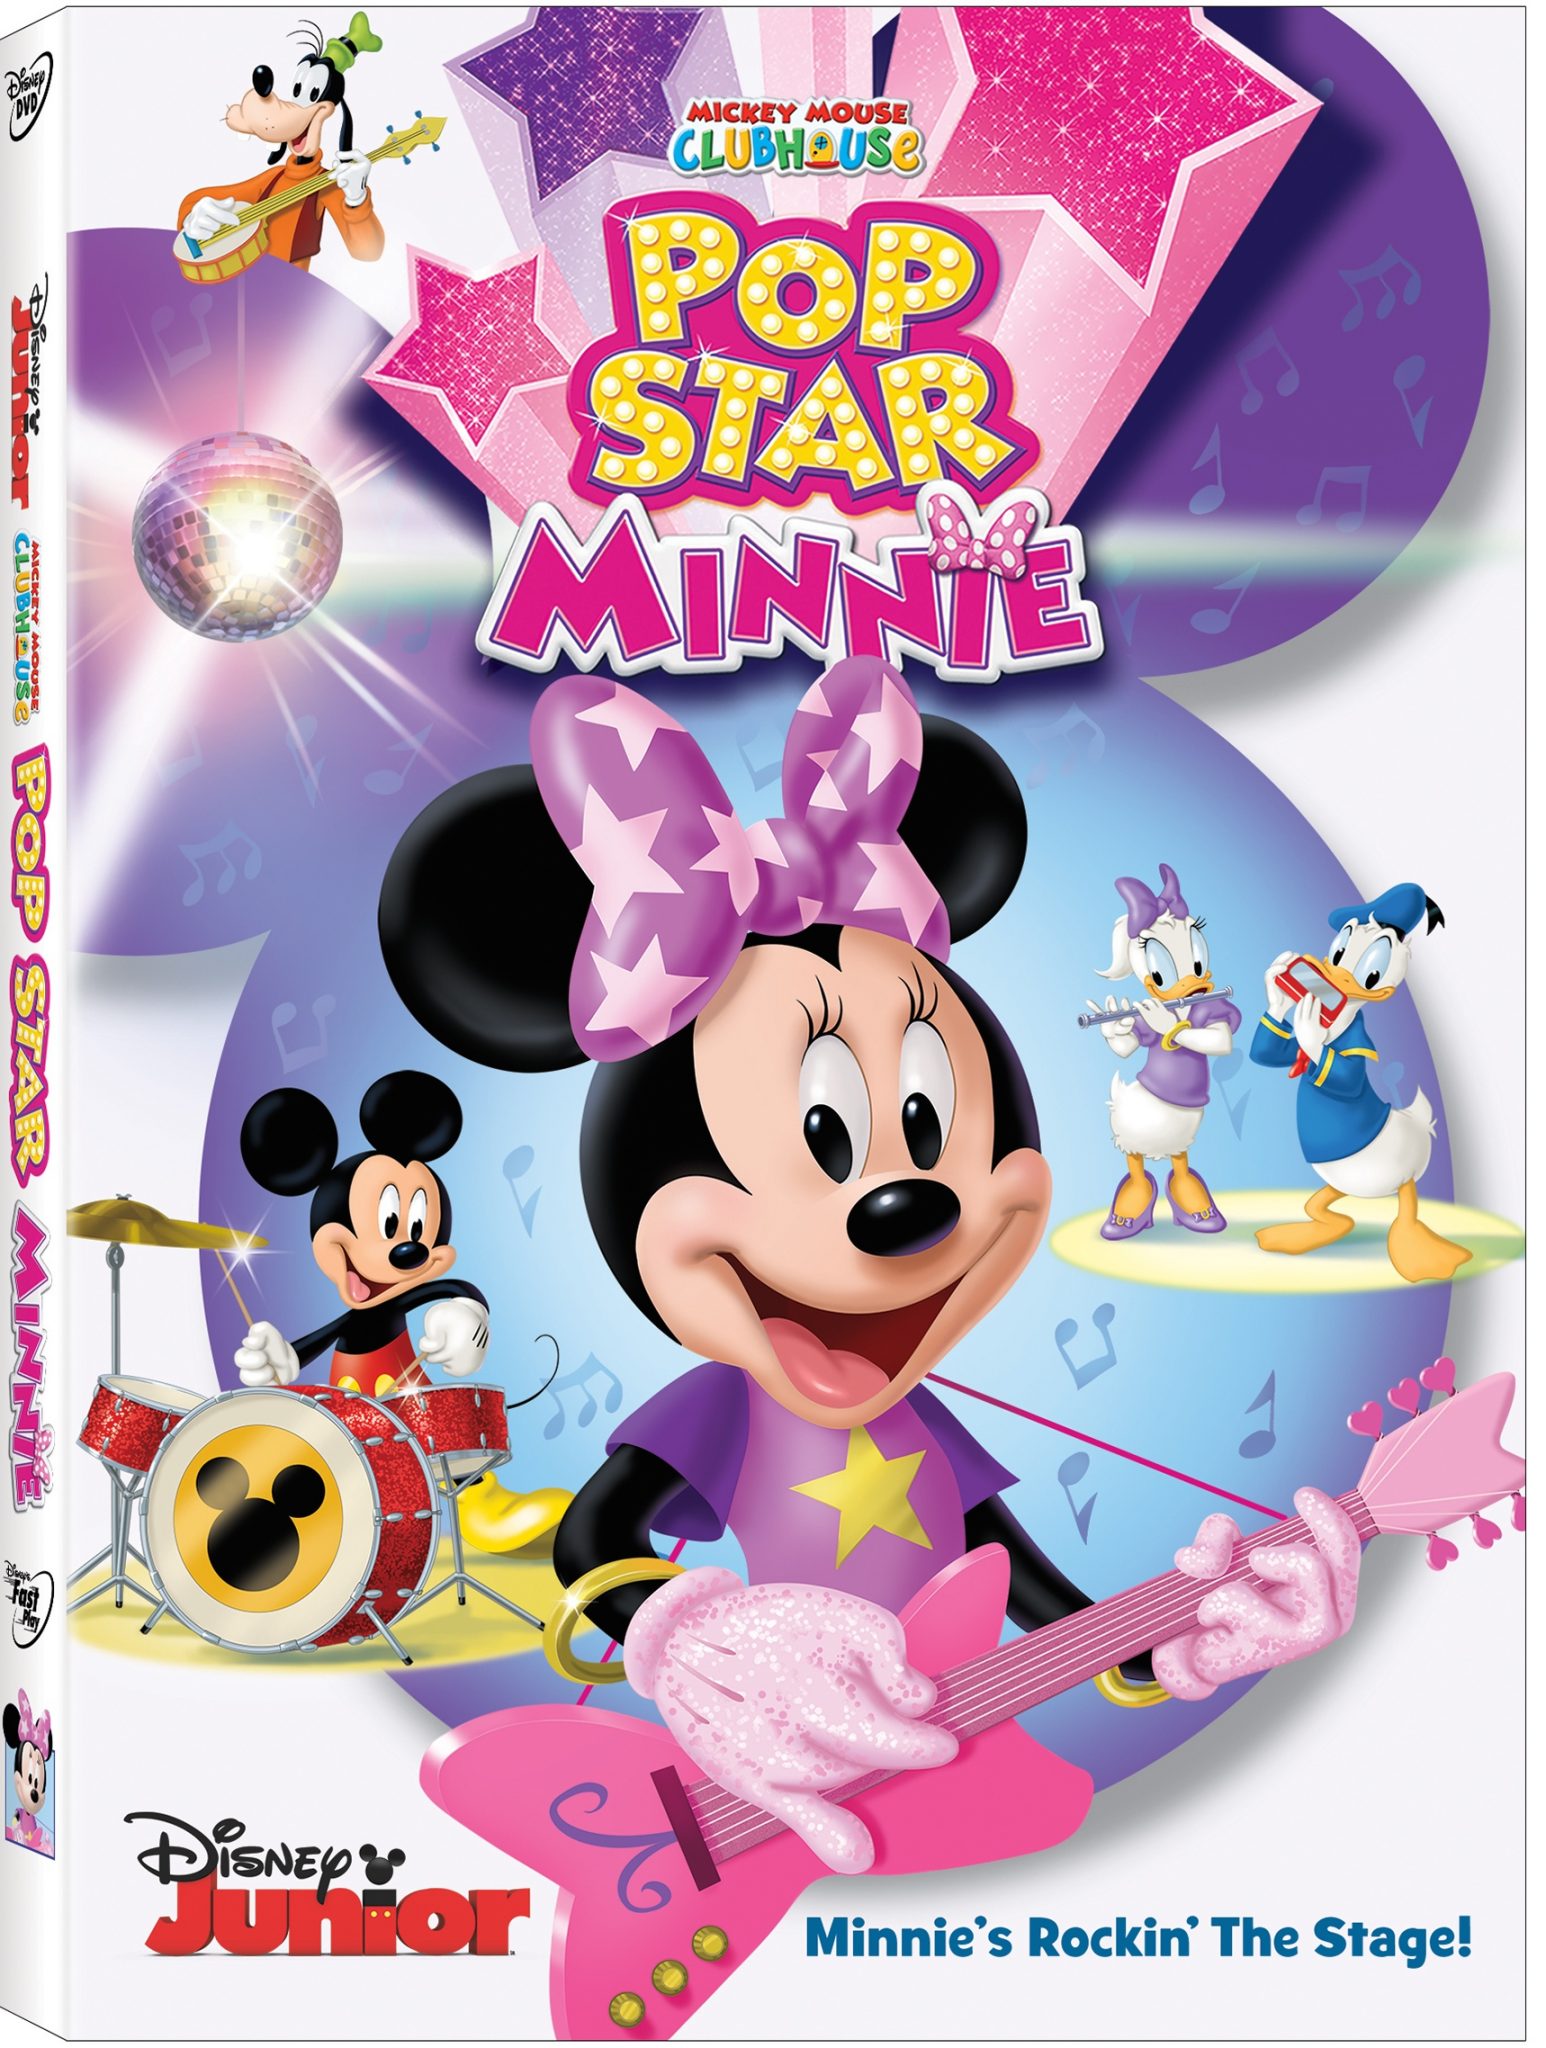 Disney Junior’s ‘Mickey Mouse Clubhouse: Pop Star Minnie’ Now Available on DVD